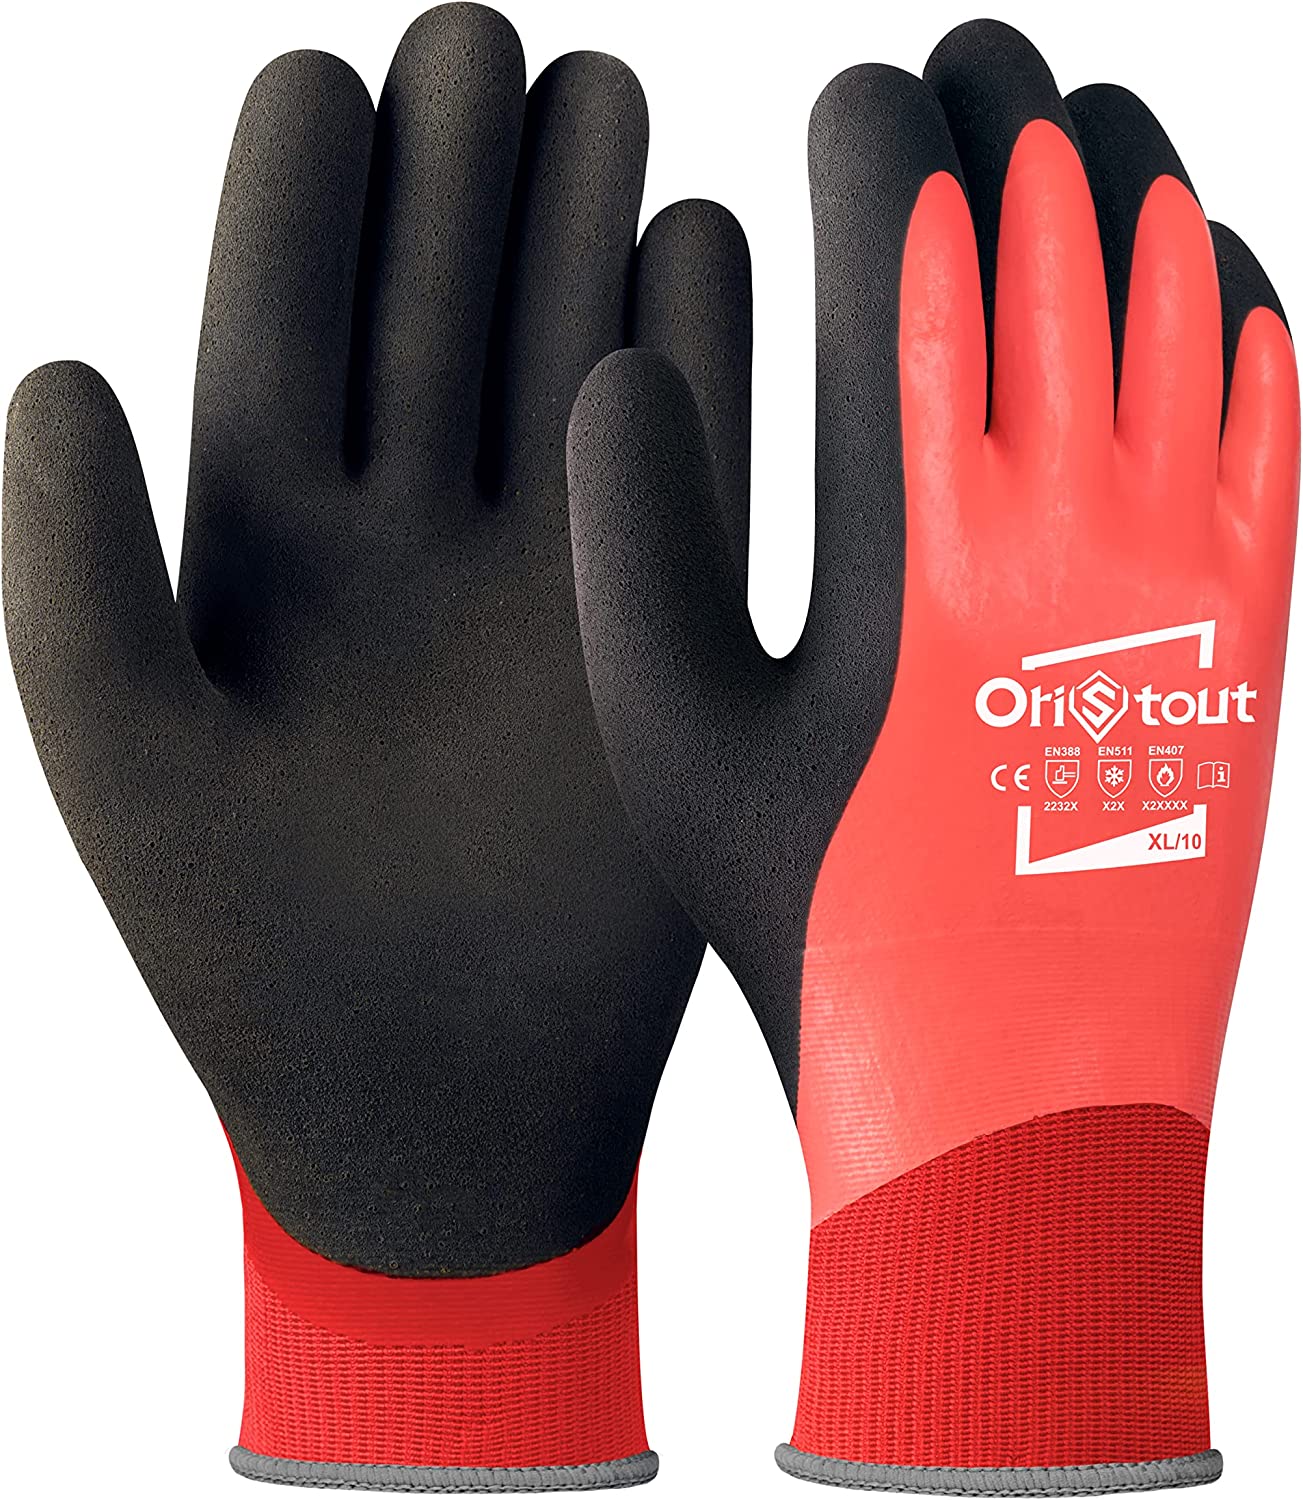 OriStout Waterproof Winter Work Gloves for Men and Women, Touchscreen, Freezer Gloves, Thermal Insulated, for Cold Weather